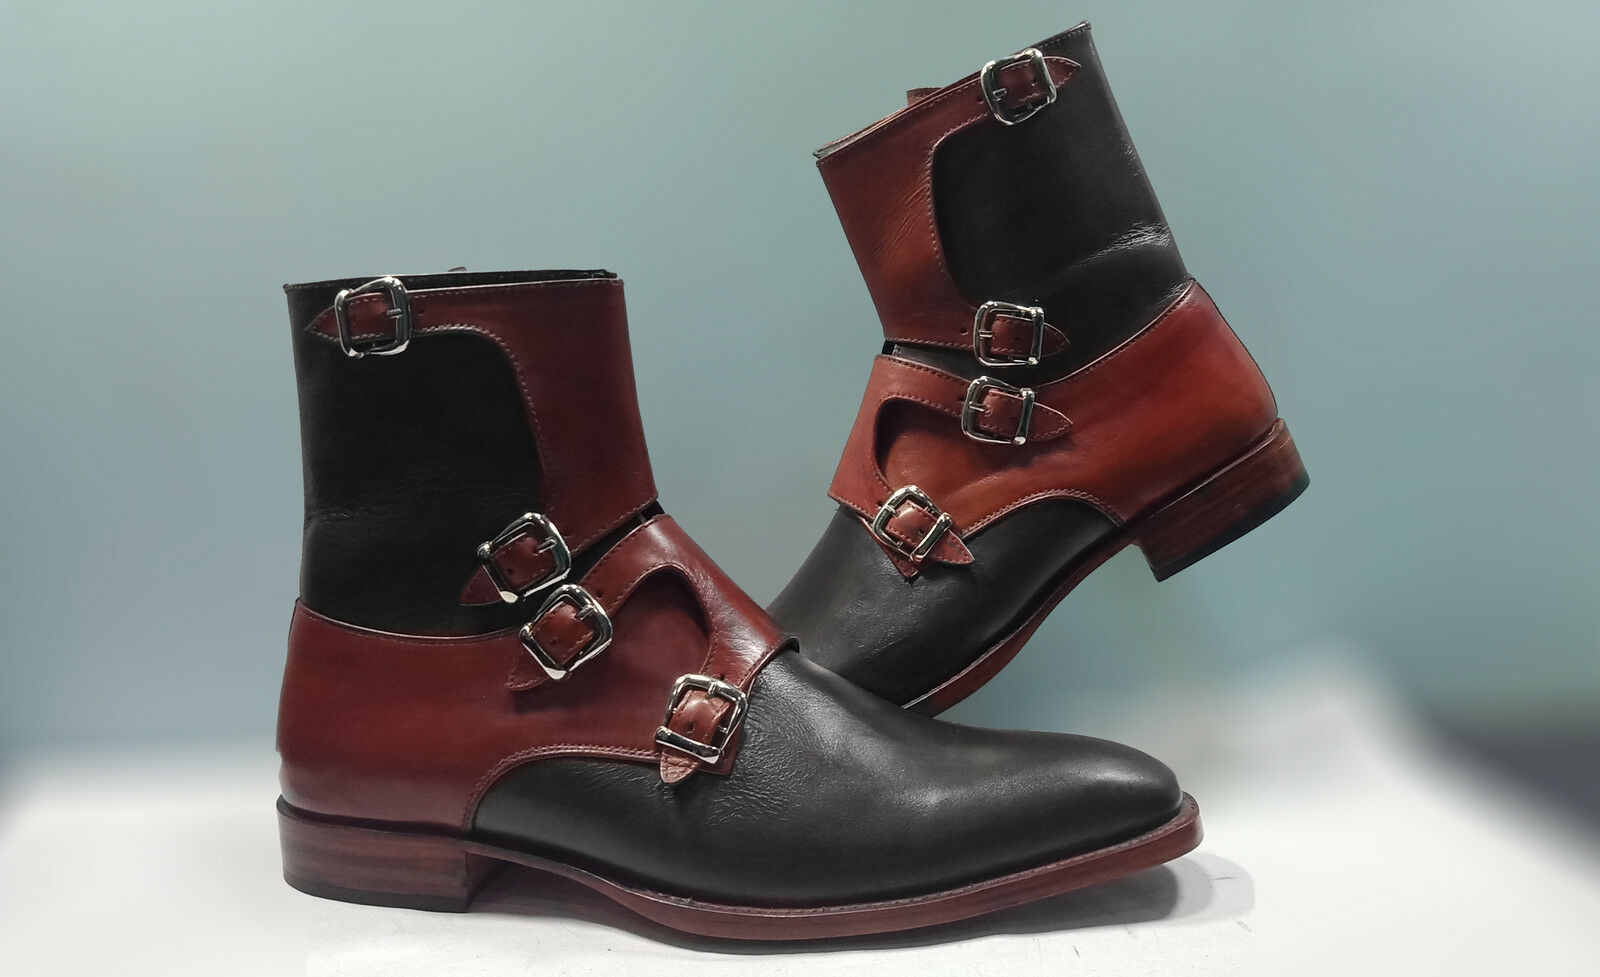 Men's Two Tone Tetra Monk Buckle Straps Ankle Maroon Black Leather Boots US 7-16